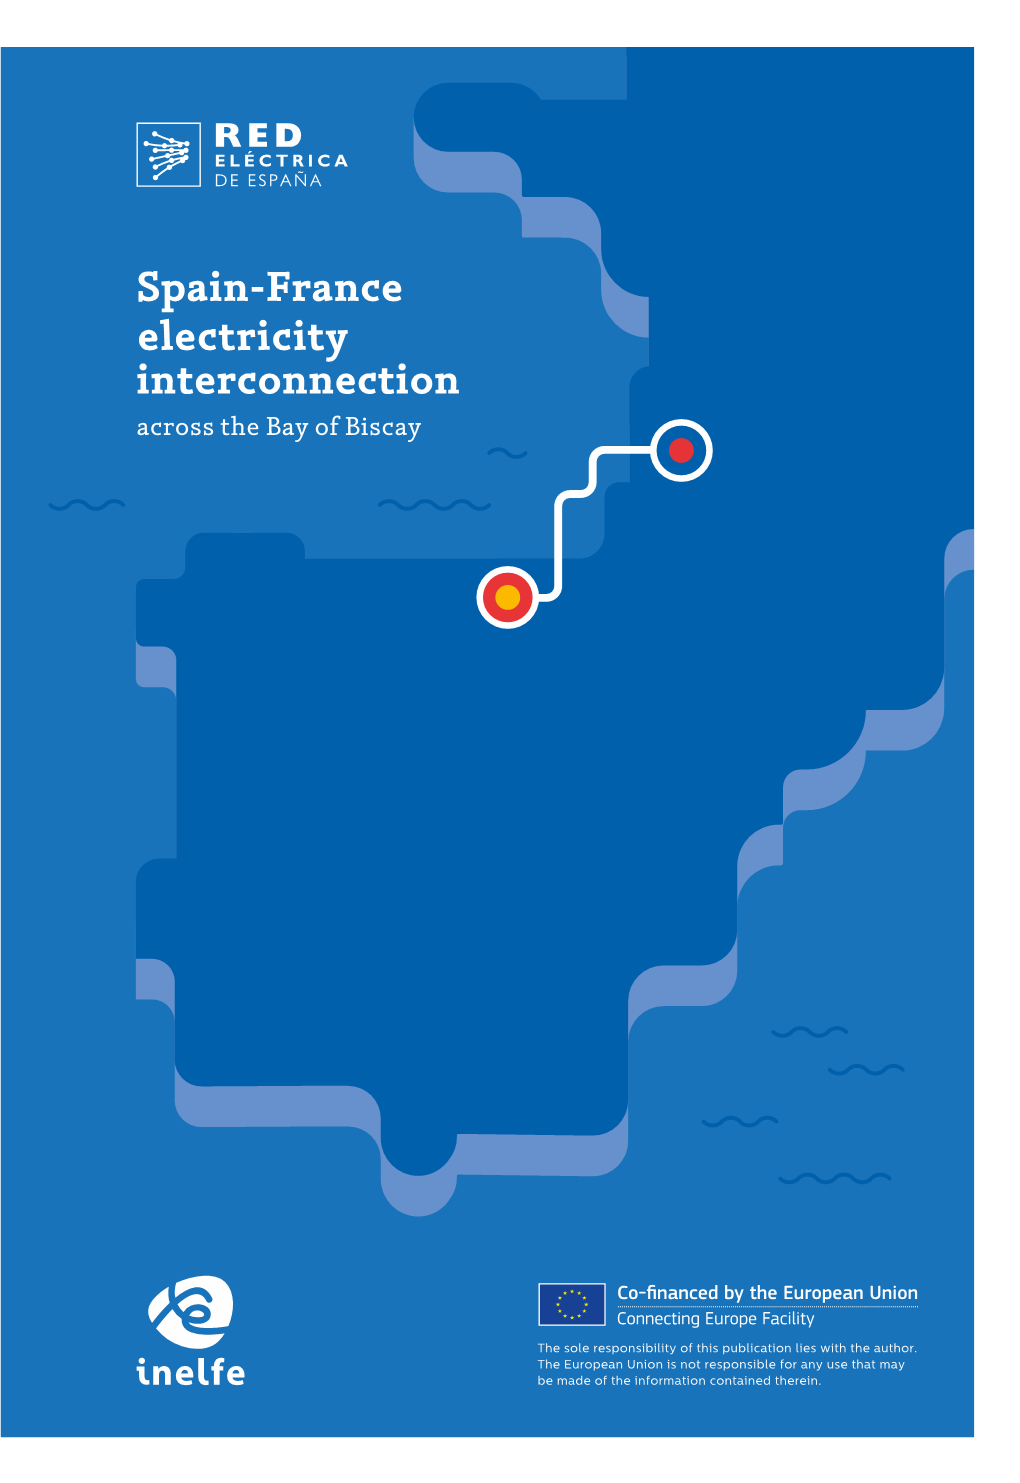 Spain-France Electricity Interconnection Across the Bay of Biscay